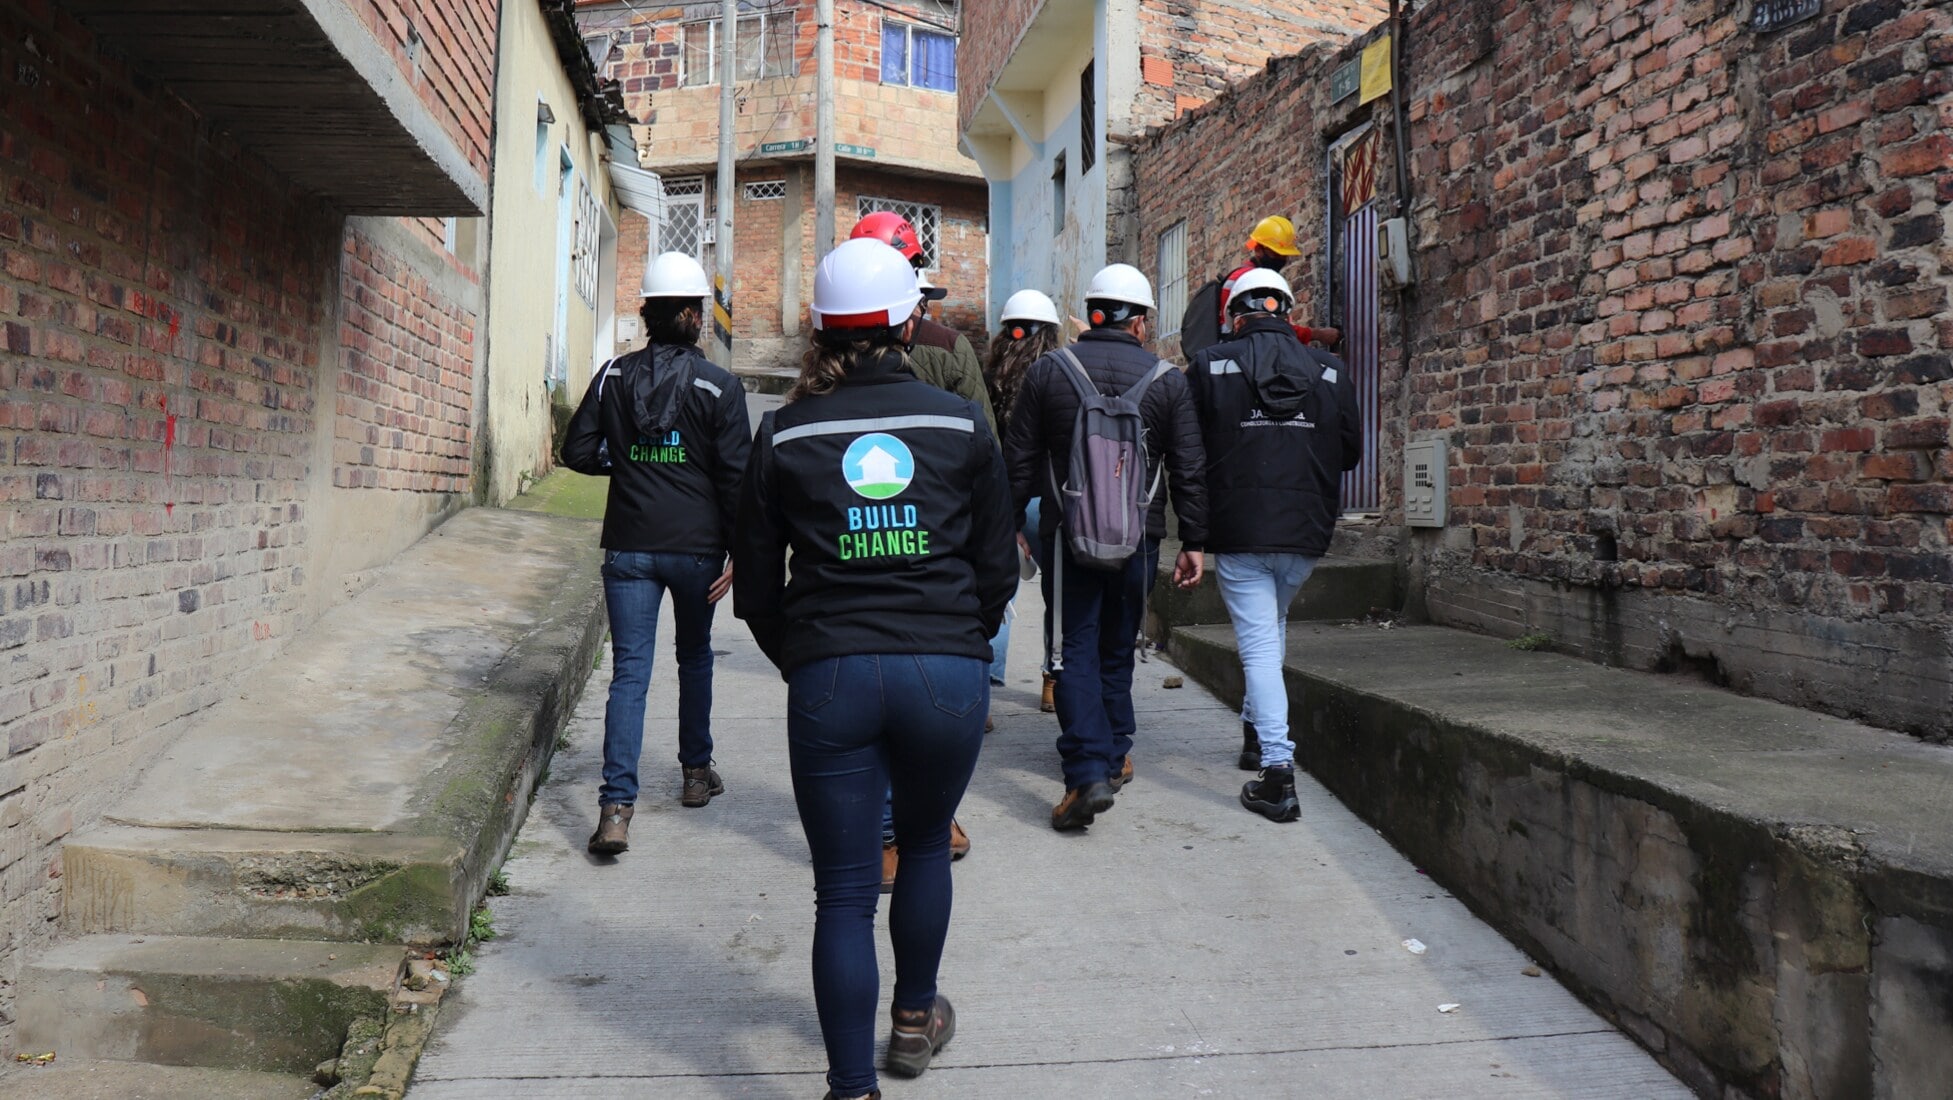 Six individuals with their backs turned to the camera walking down a narrow alleyway in Colombia, with brick walls on either side of them. All individuals are wearing hard hats and jeans; three are wearing Build Change-branded jackets.